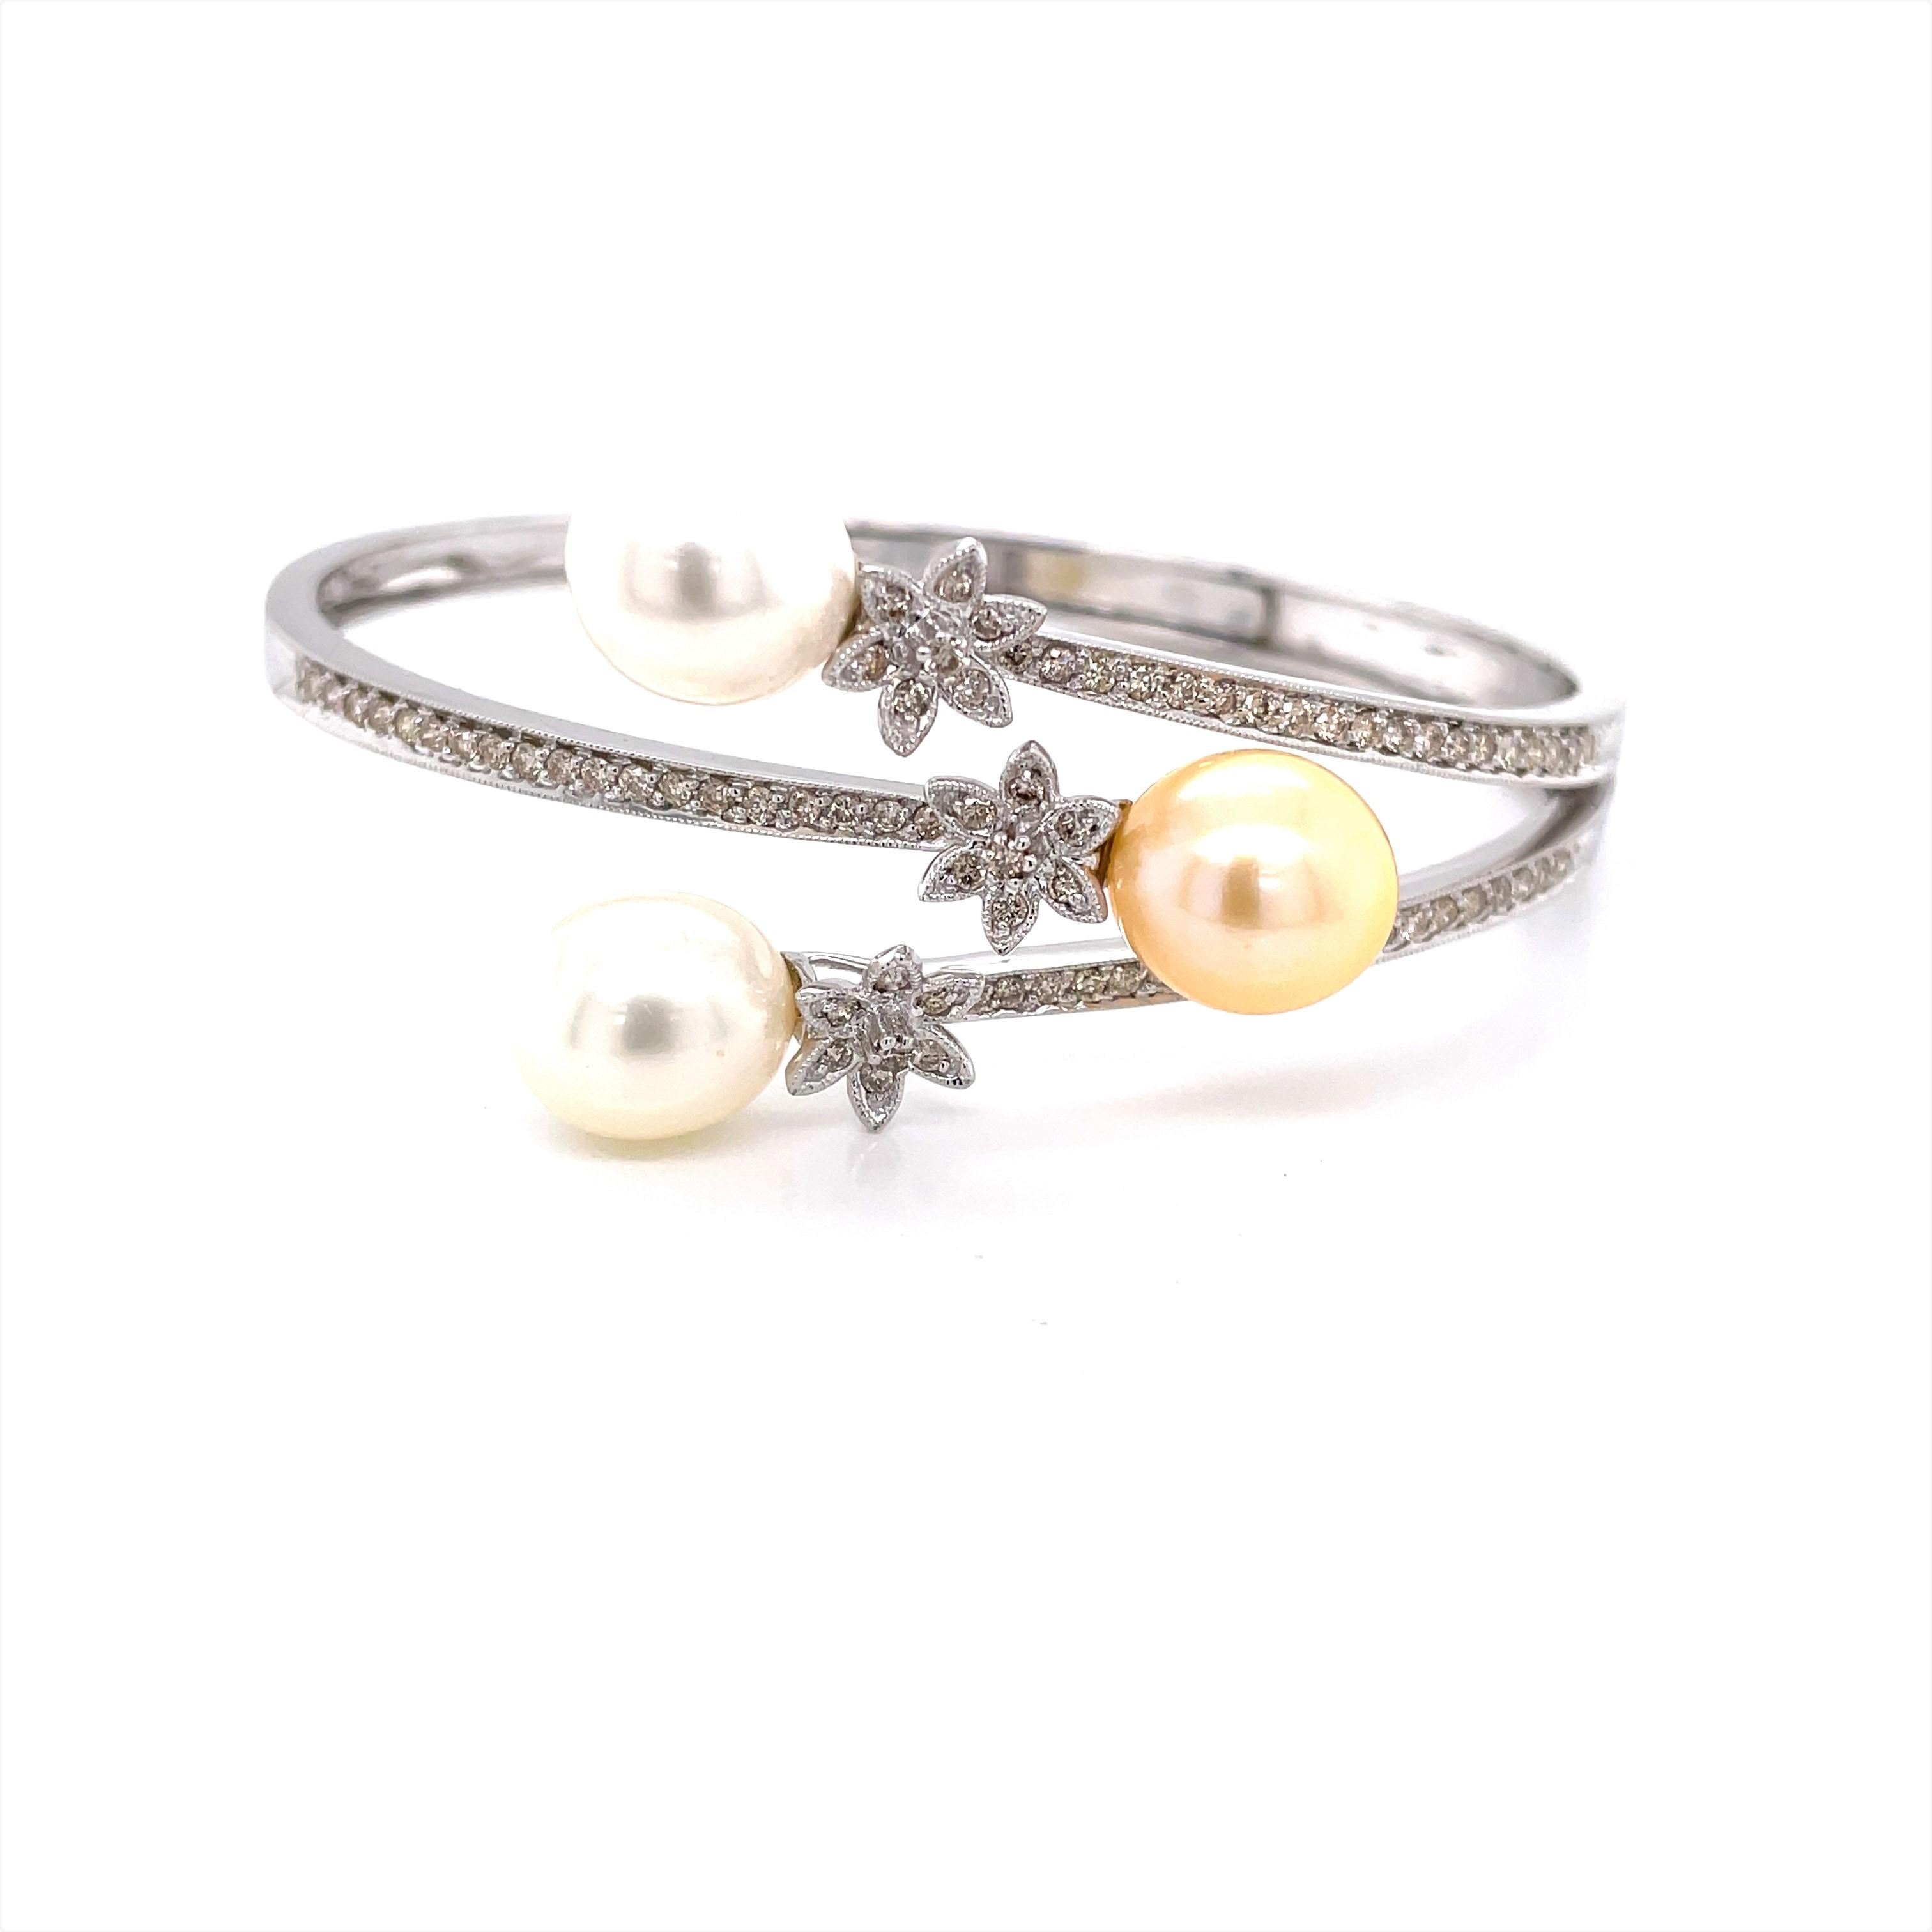 A dressy bangle bracelet, perfect for bridal or special occasion. Three 9.7mm tear drop shaped AAA cultured Akoya pearls, two white and one champagne, are featured on the three prong wrap design of this eighteen karat 18 karat white gold 2.5 inch